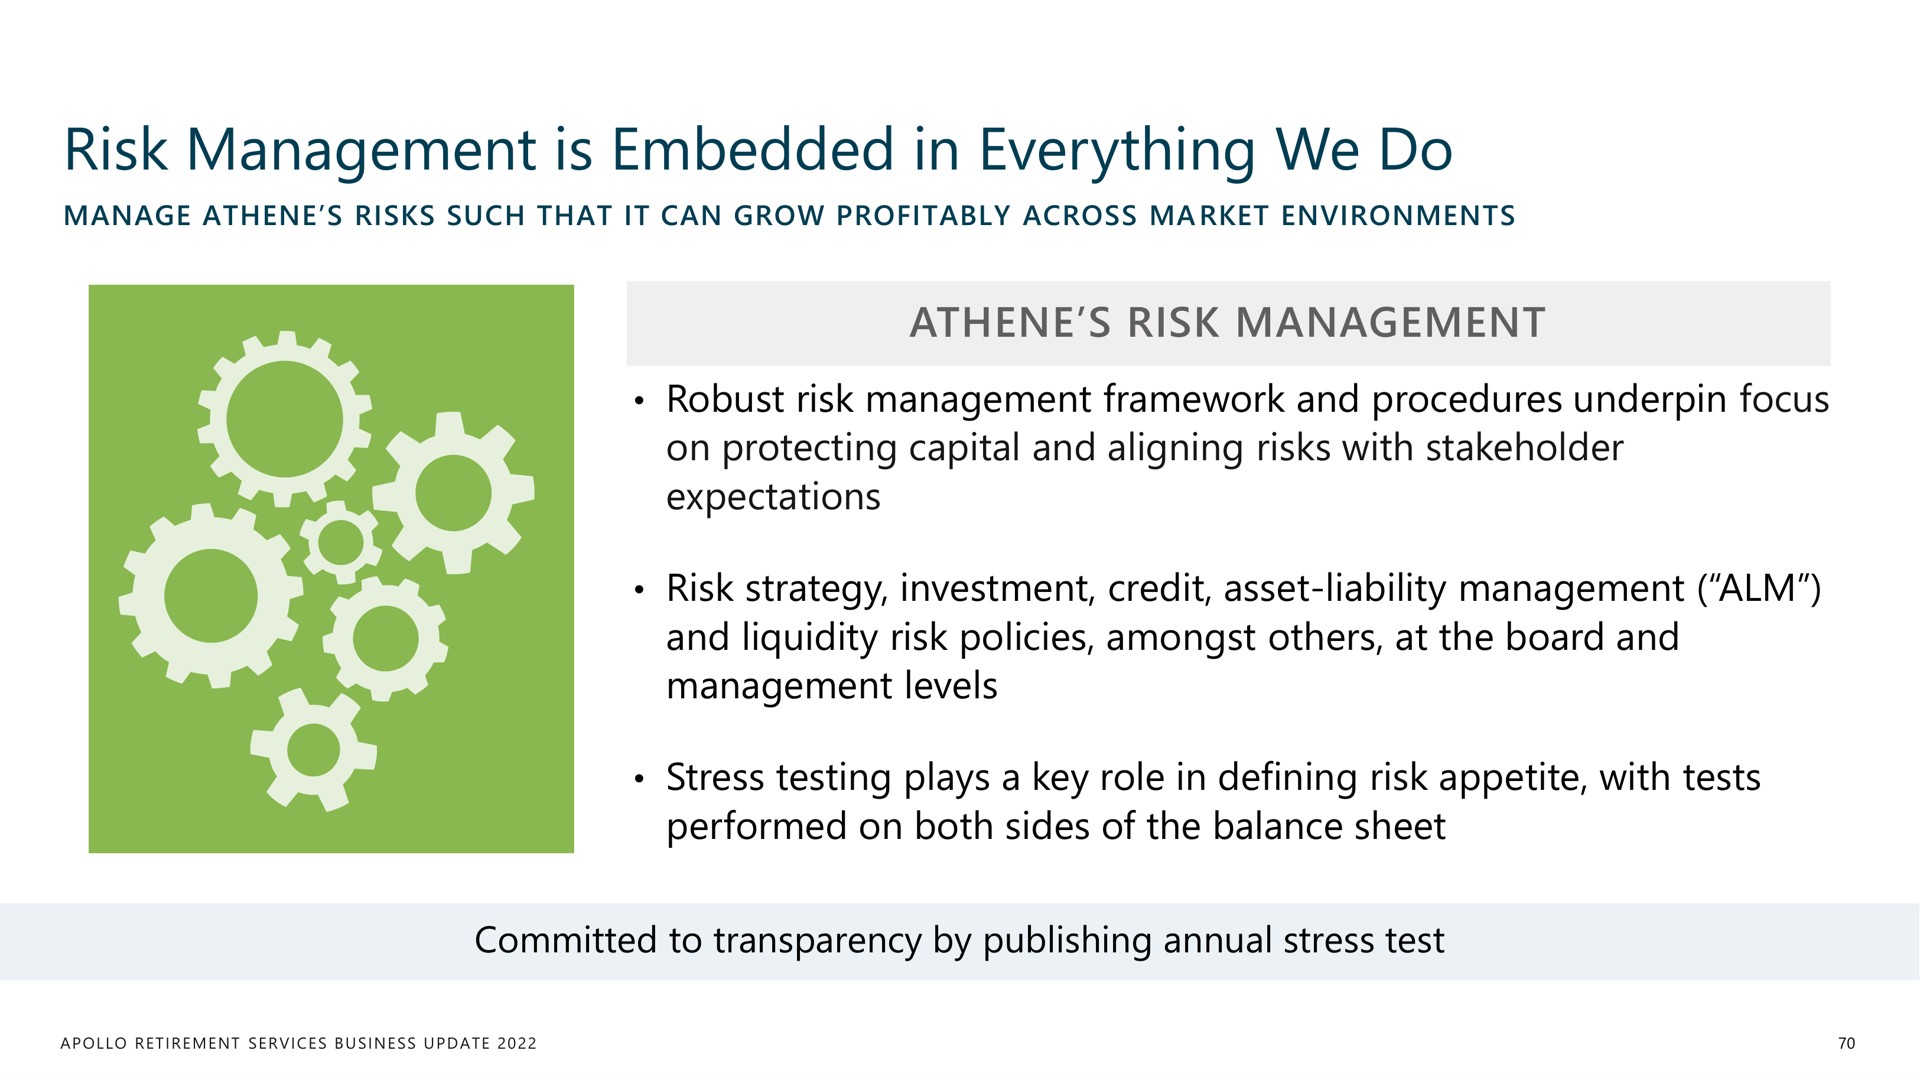 risk management is embedded in everything we do | Apollo Global Management